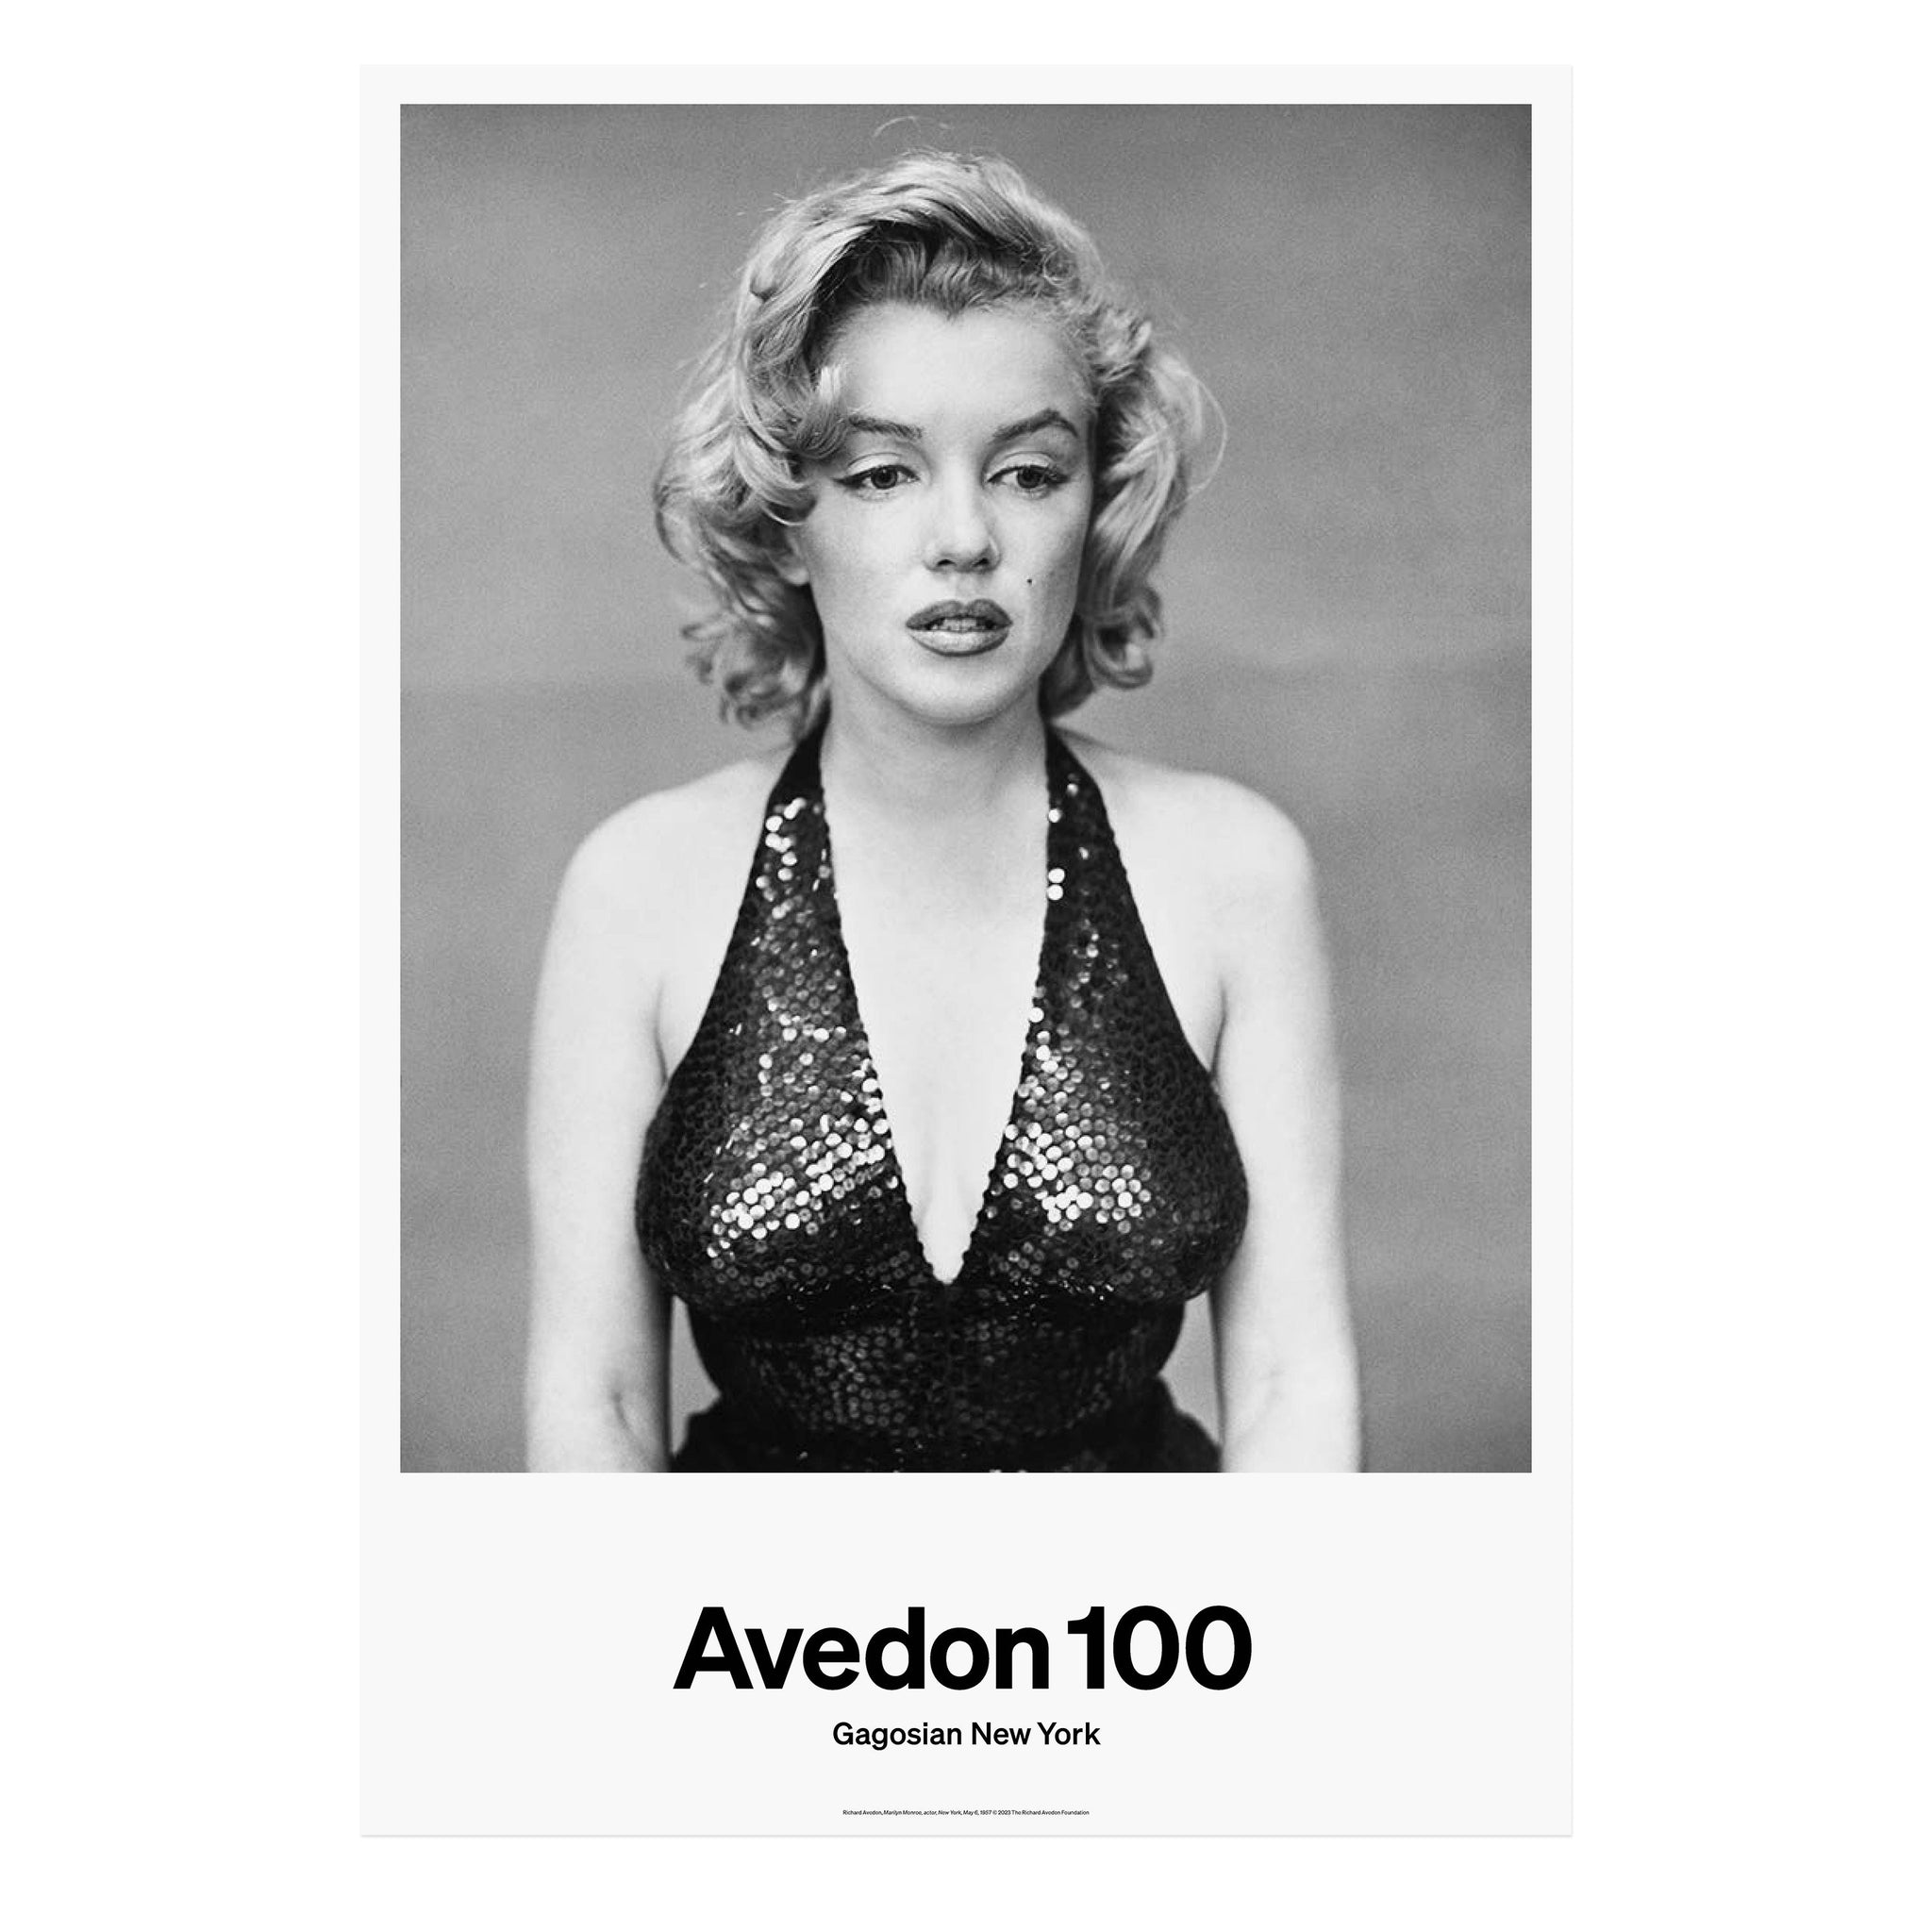 Poster featuring a photograph by Richard Avedon of Marilyn Monroe